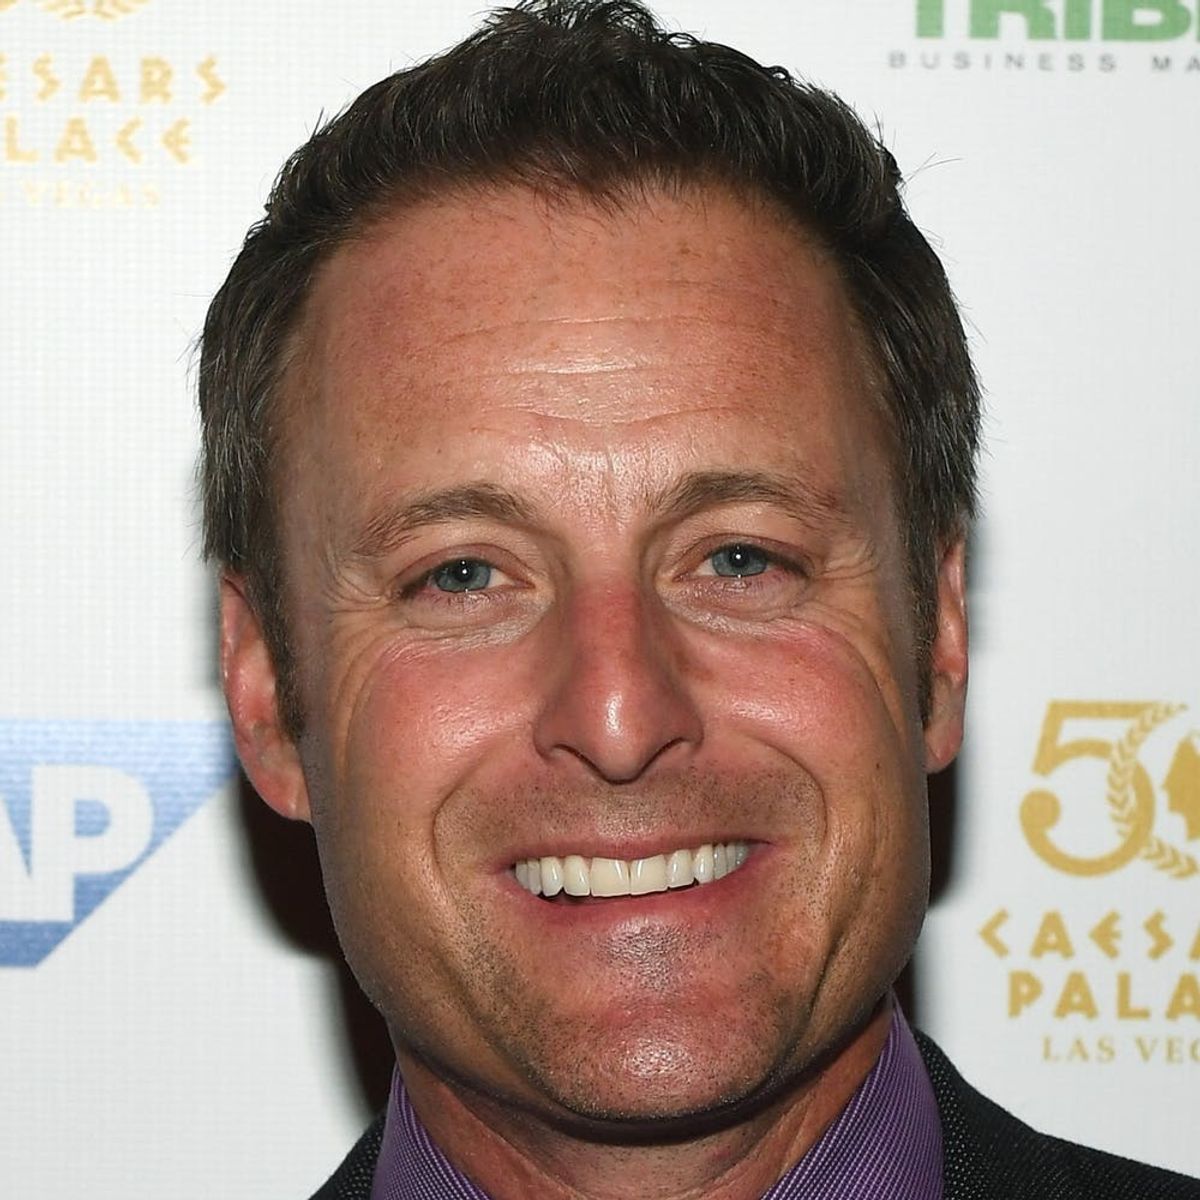 Chris Harrison Says The Bachelorette Makes Him Cry for *This* One Reason